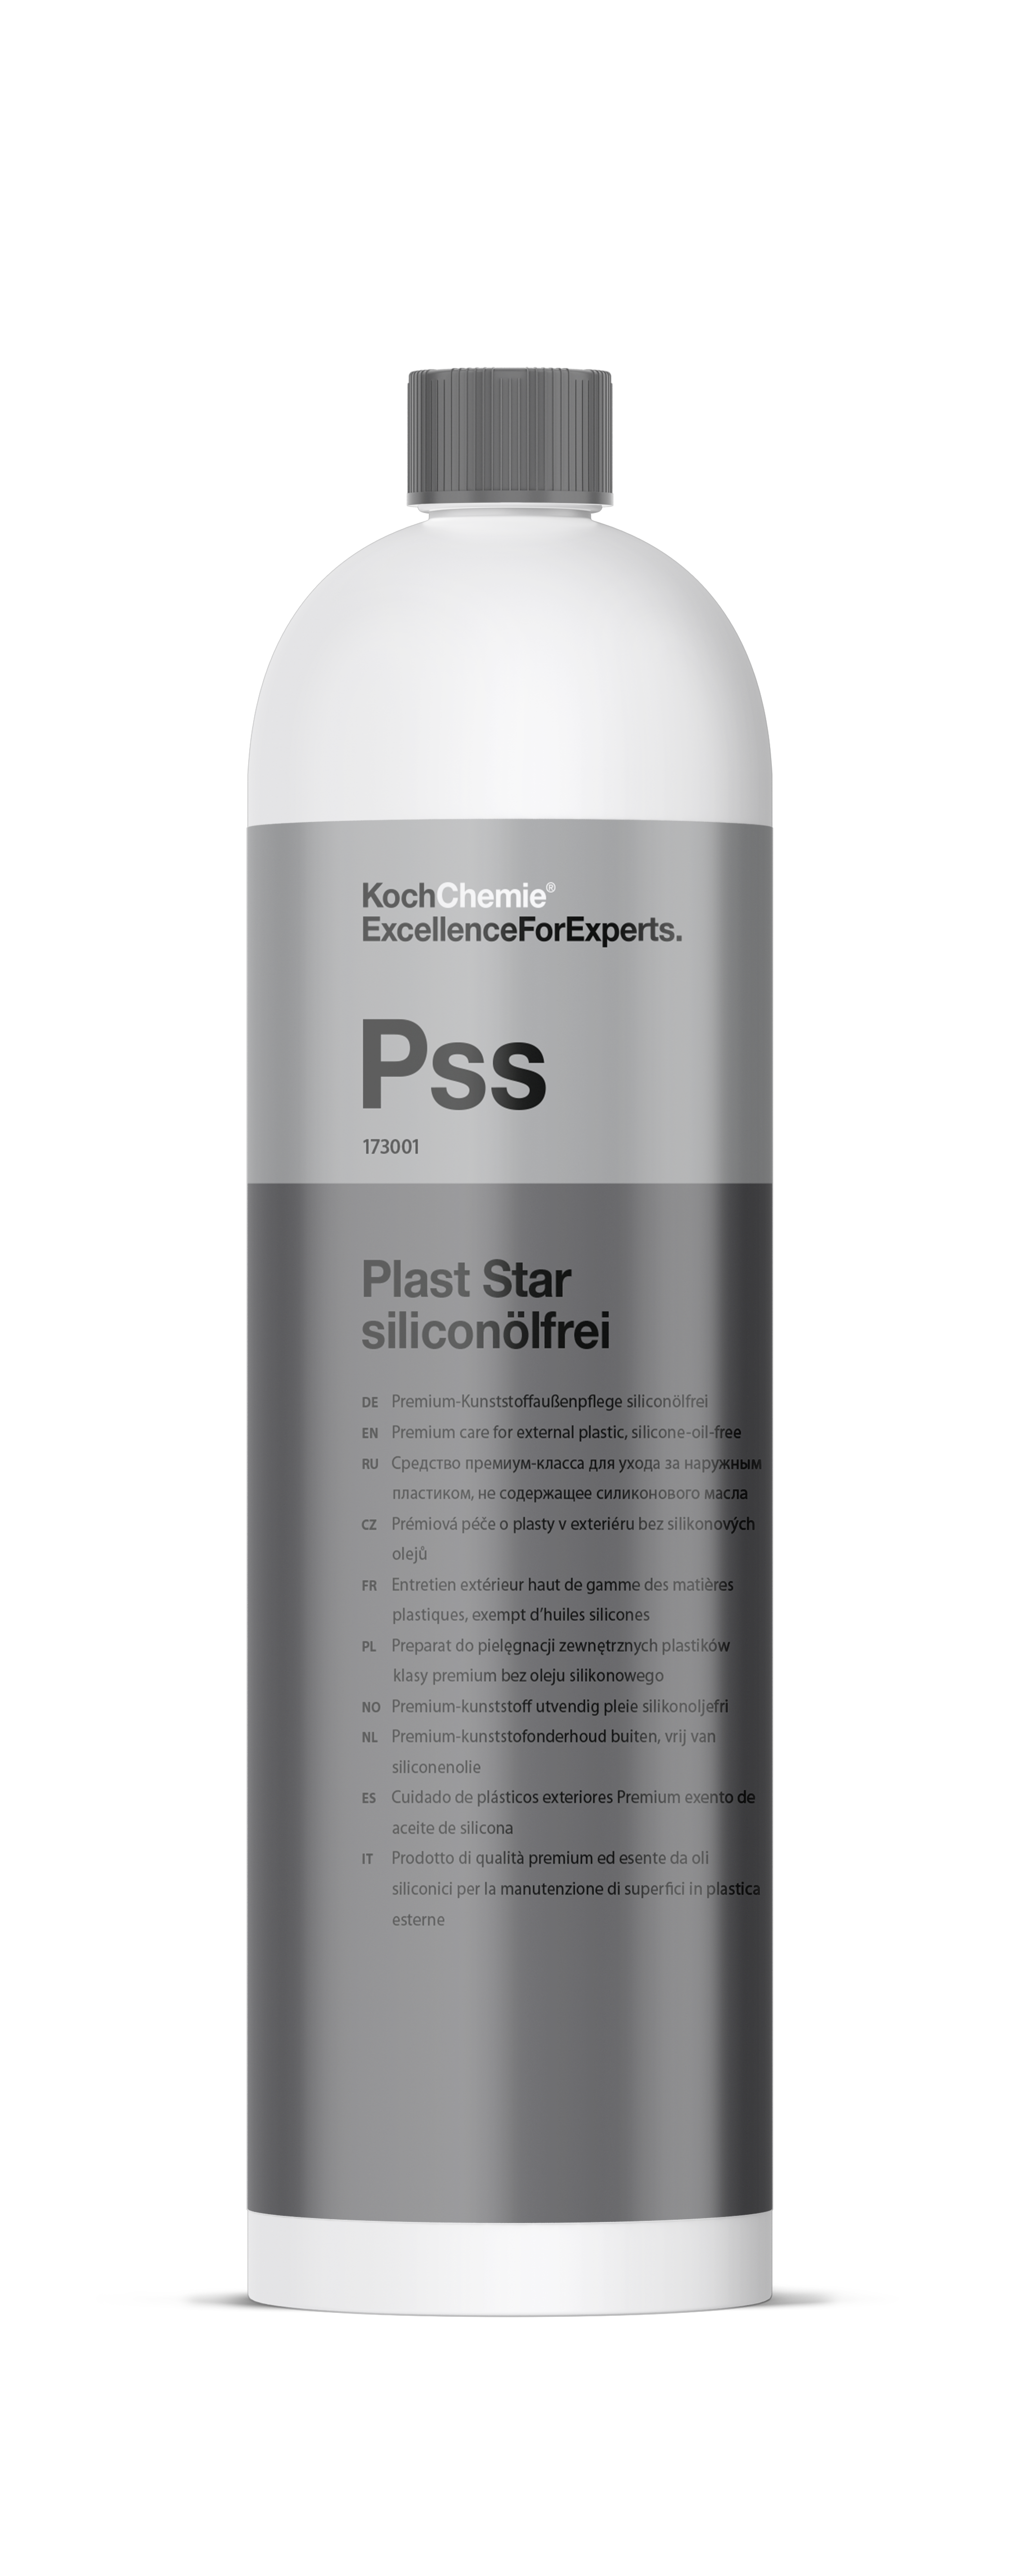 Plast Star Silicon Free - Pss - Parks Car Care 